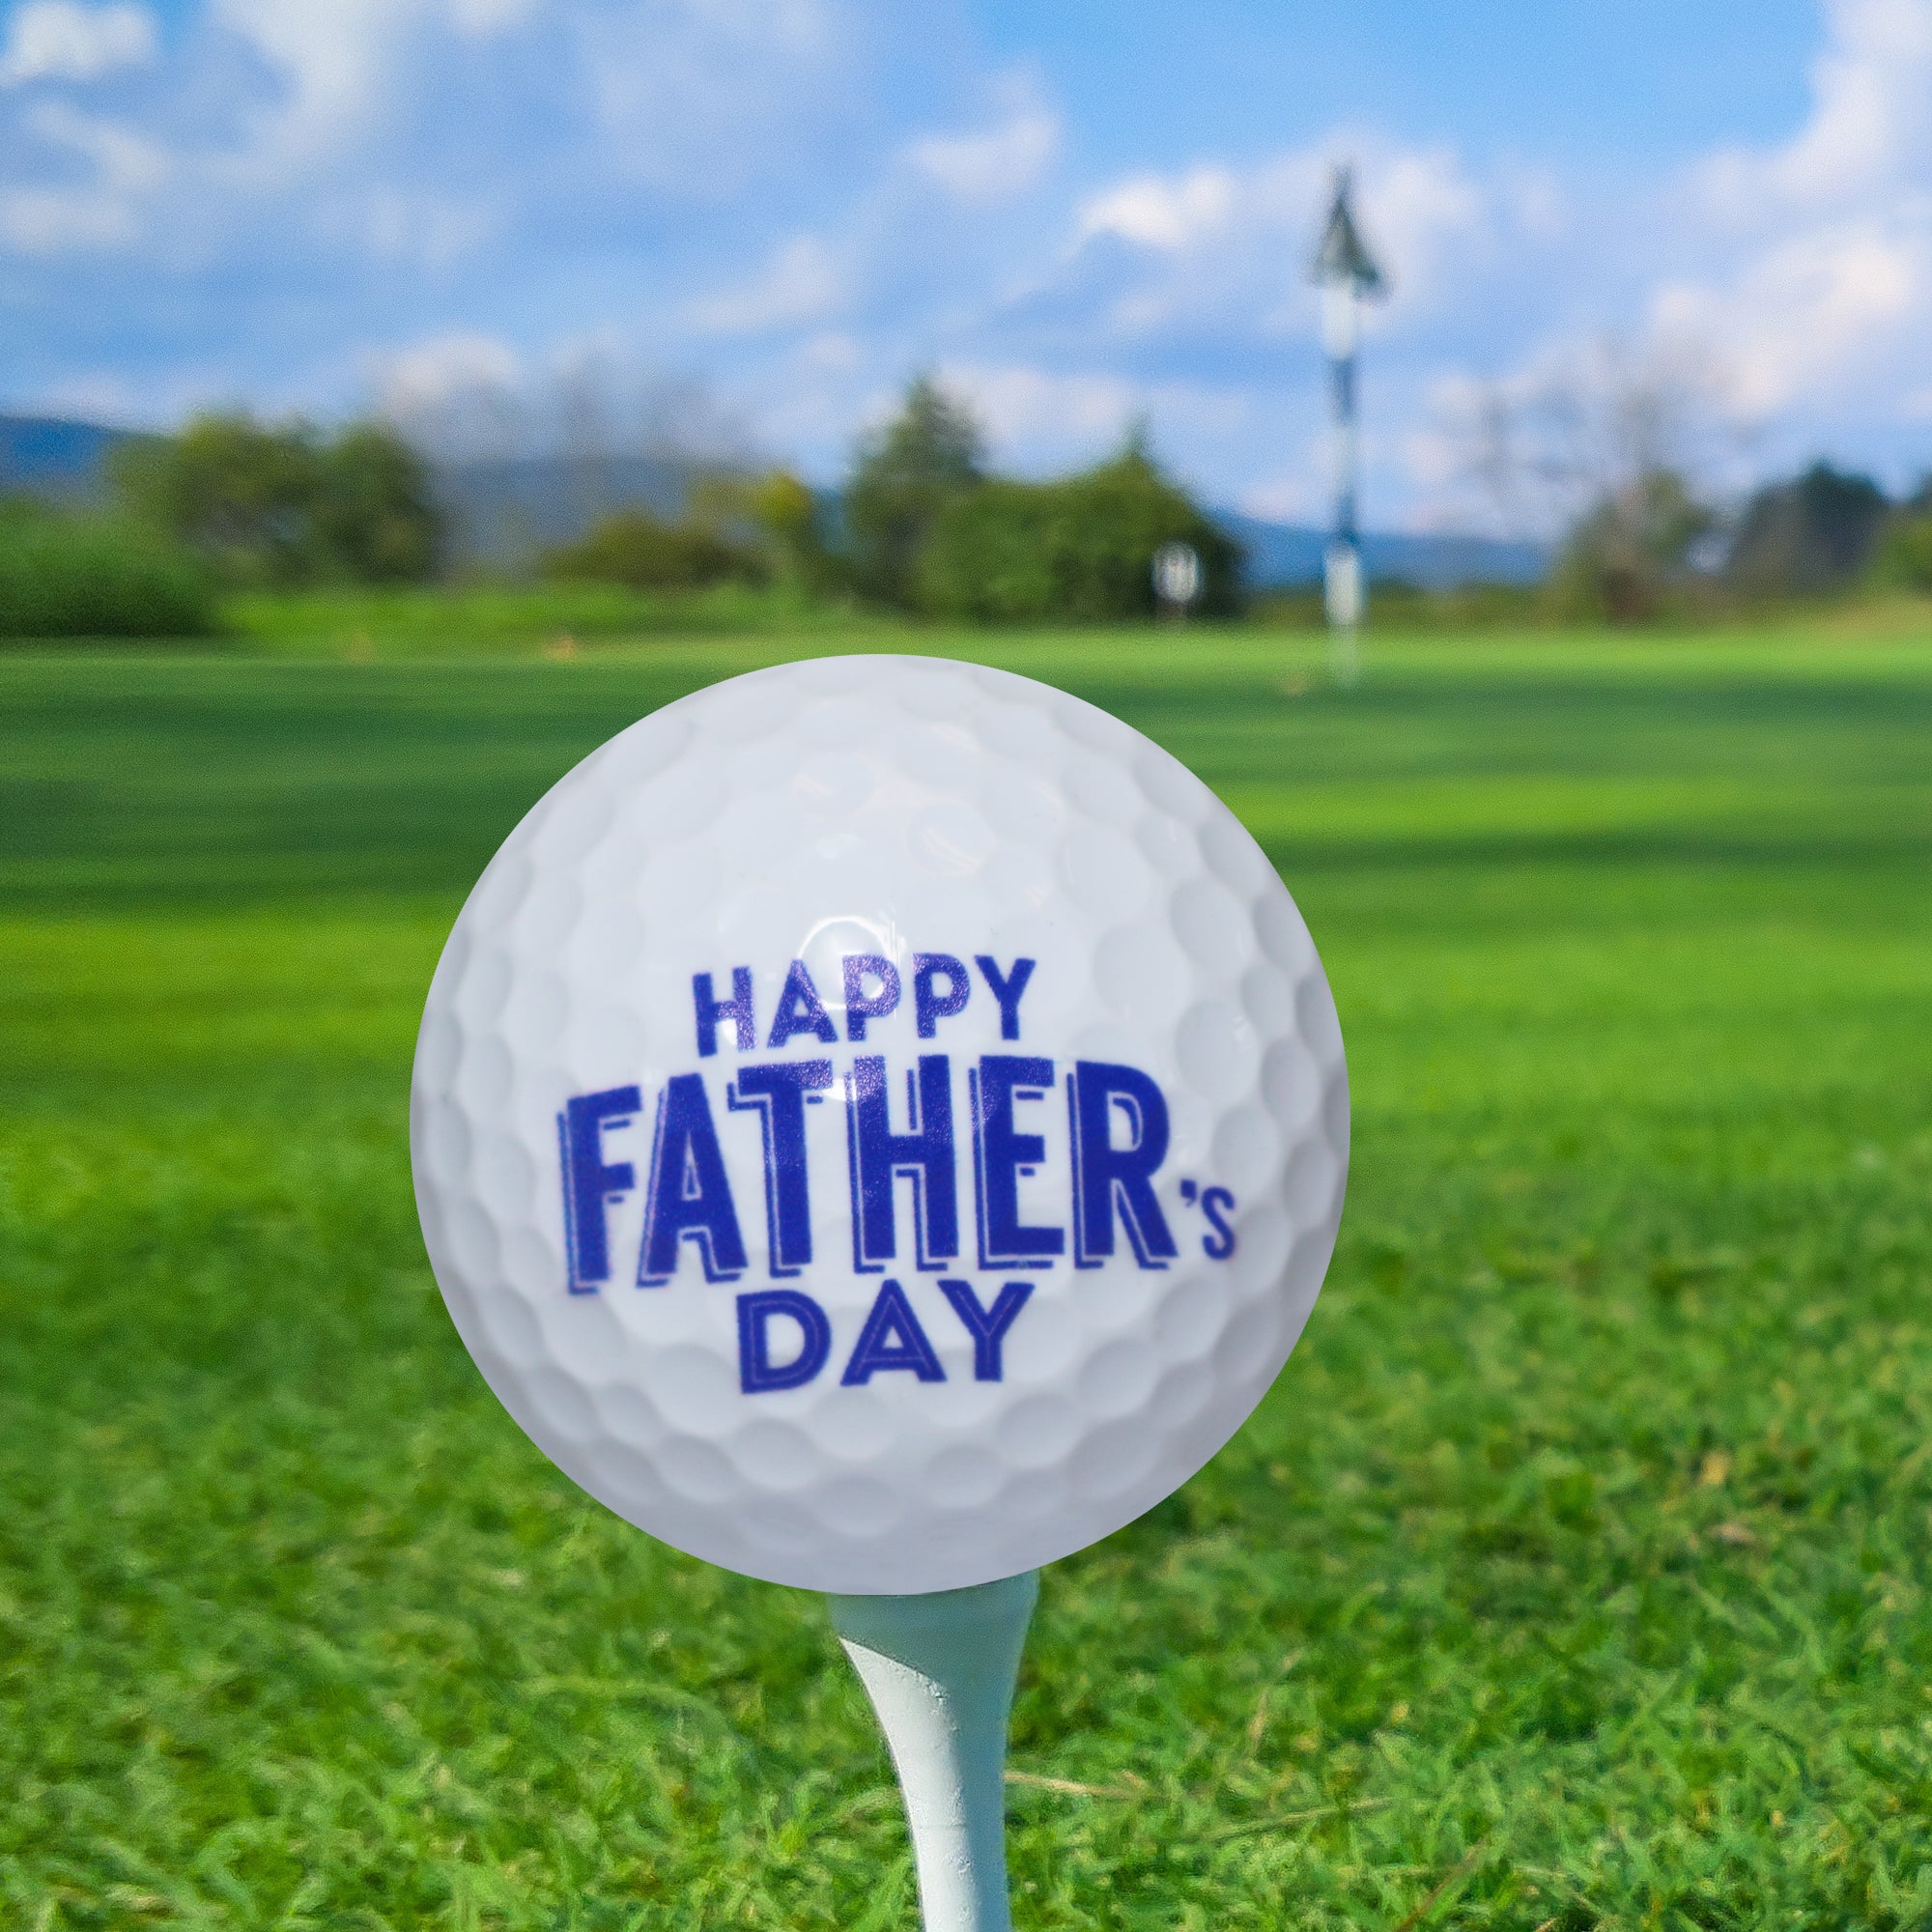 Happy Father's Day 3 Ball 20 Tee Set